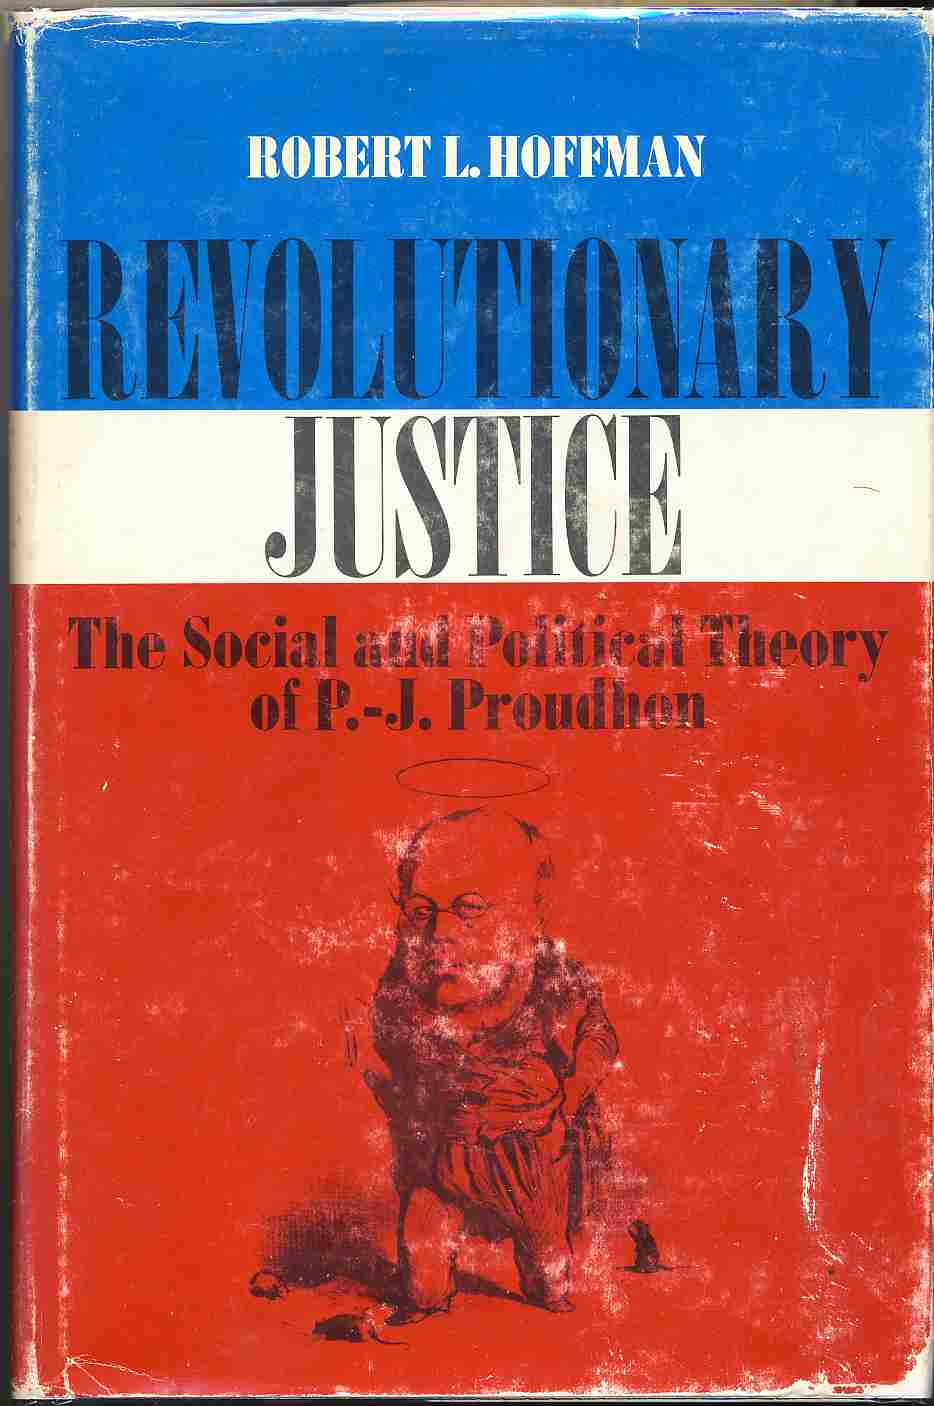 HOFFMAN, ROBERT L. - Revolutionary Justice the Social and Political Theory of P. -J. Proudhon